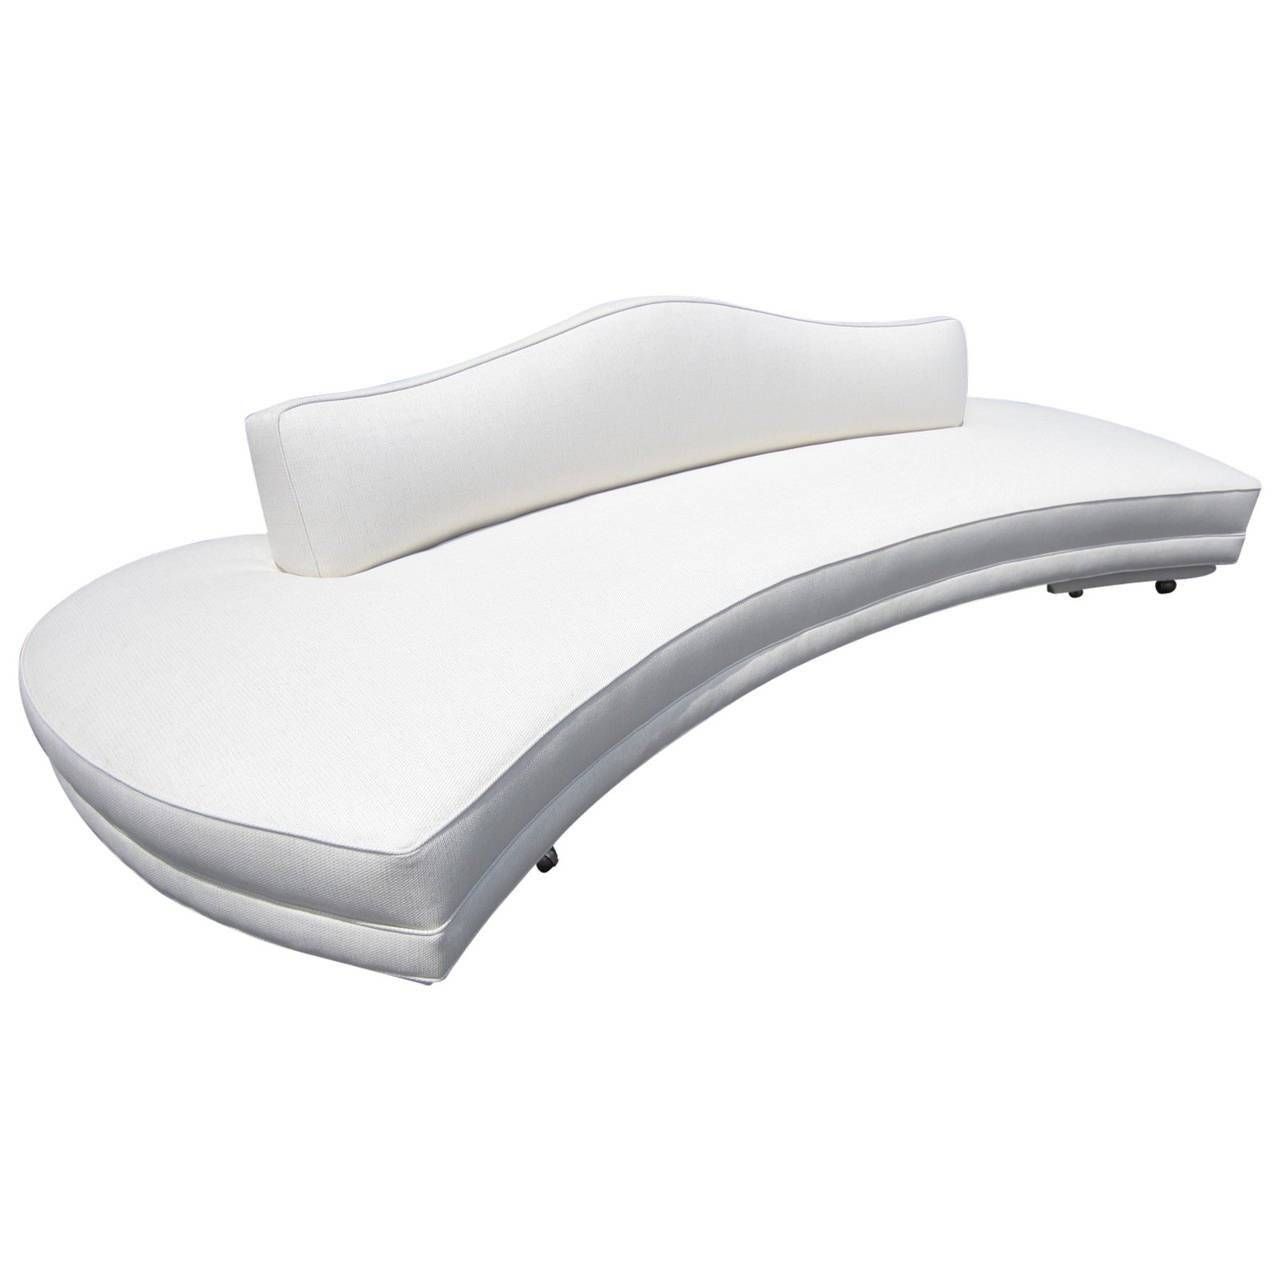 Cloud Levitating Sofa Price – Sofa Hpricot With Cloud Magnetic Floating Sofas (View 10 of 15)